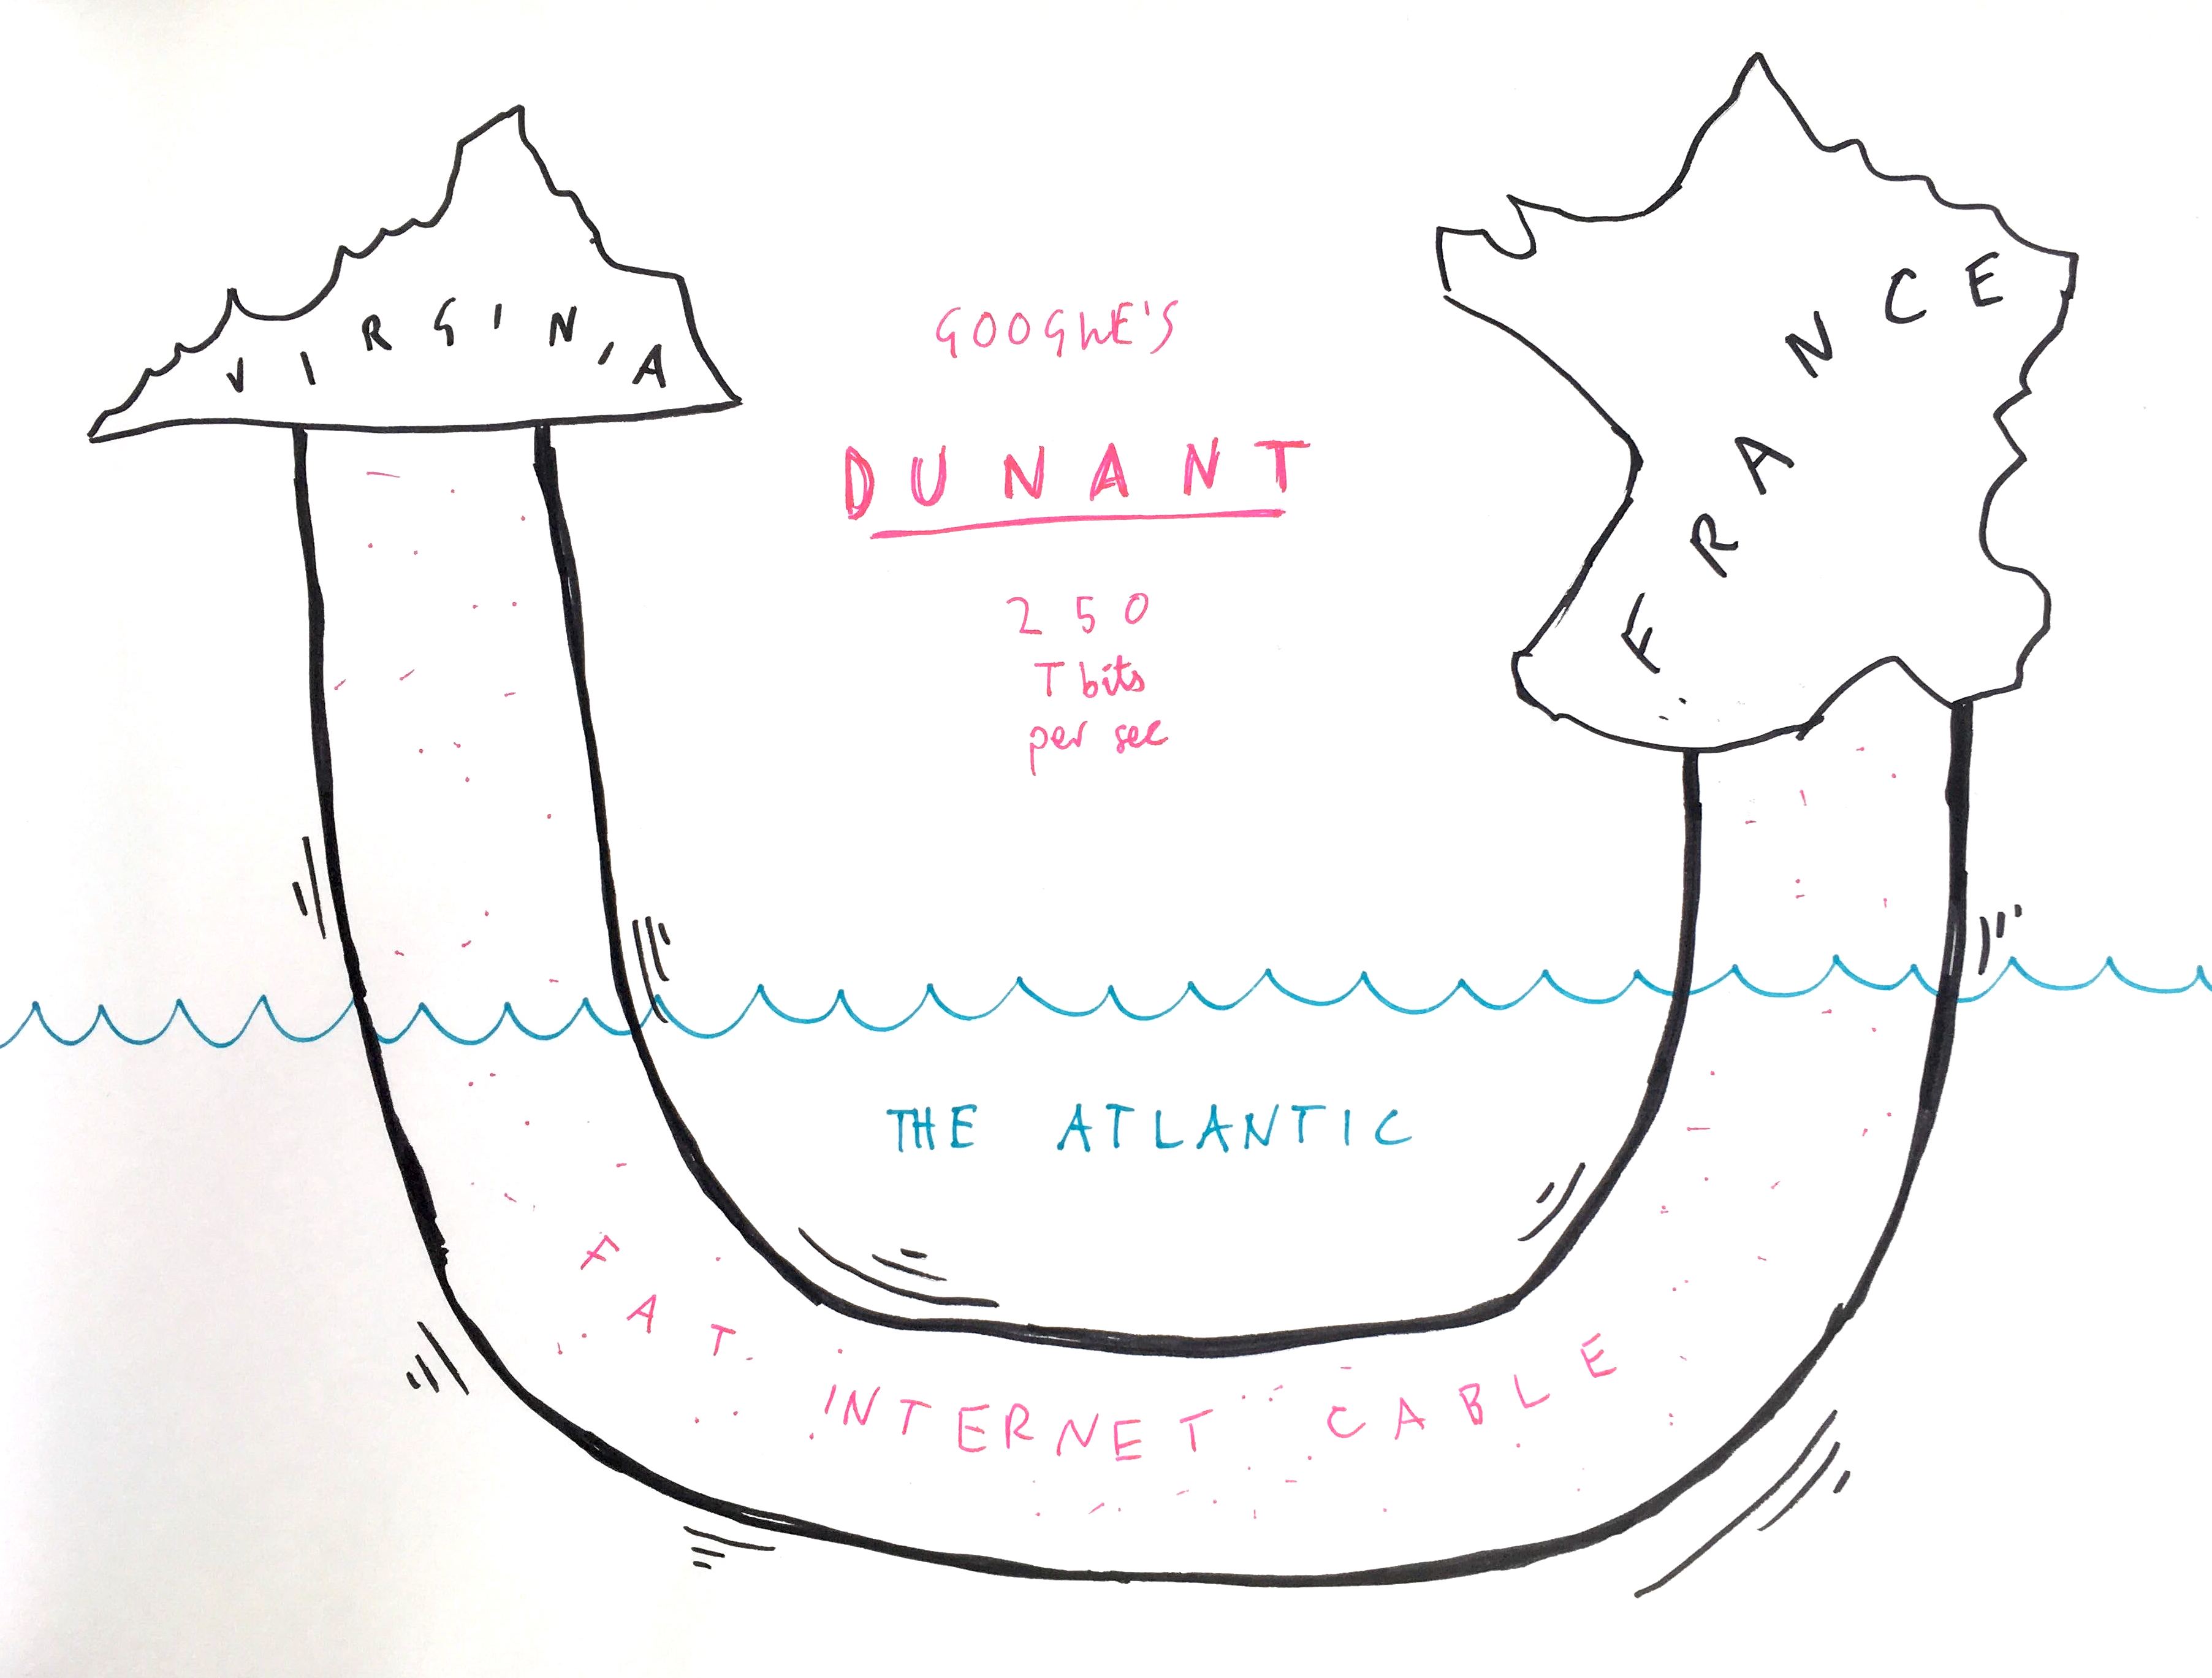 Illustration of Google Dunant connected between Virginia and France